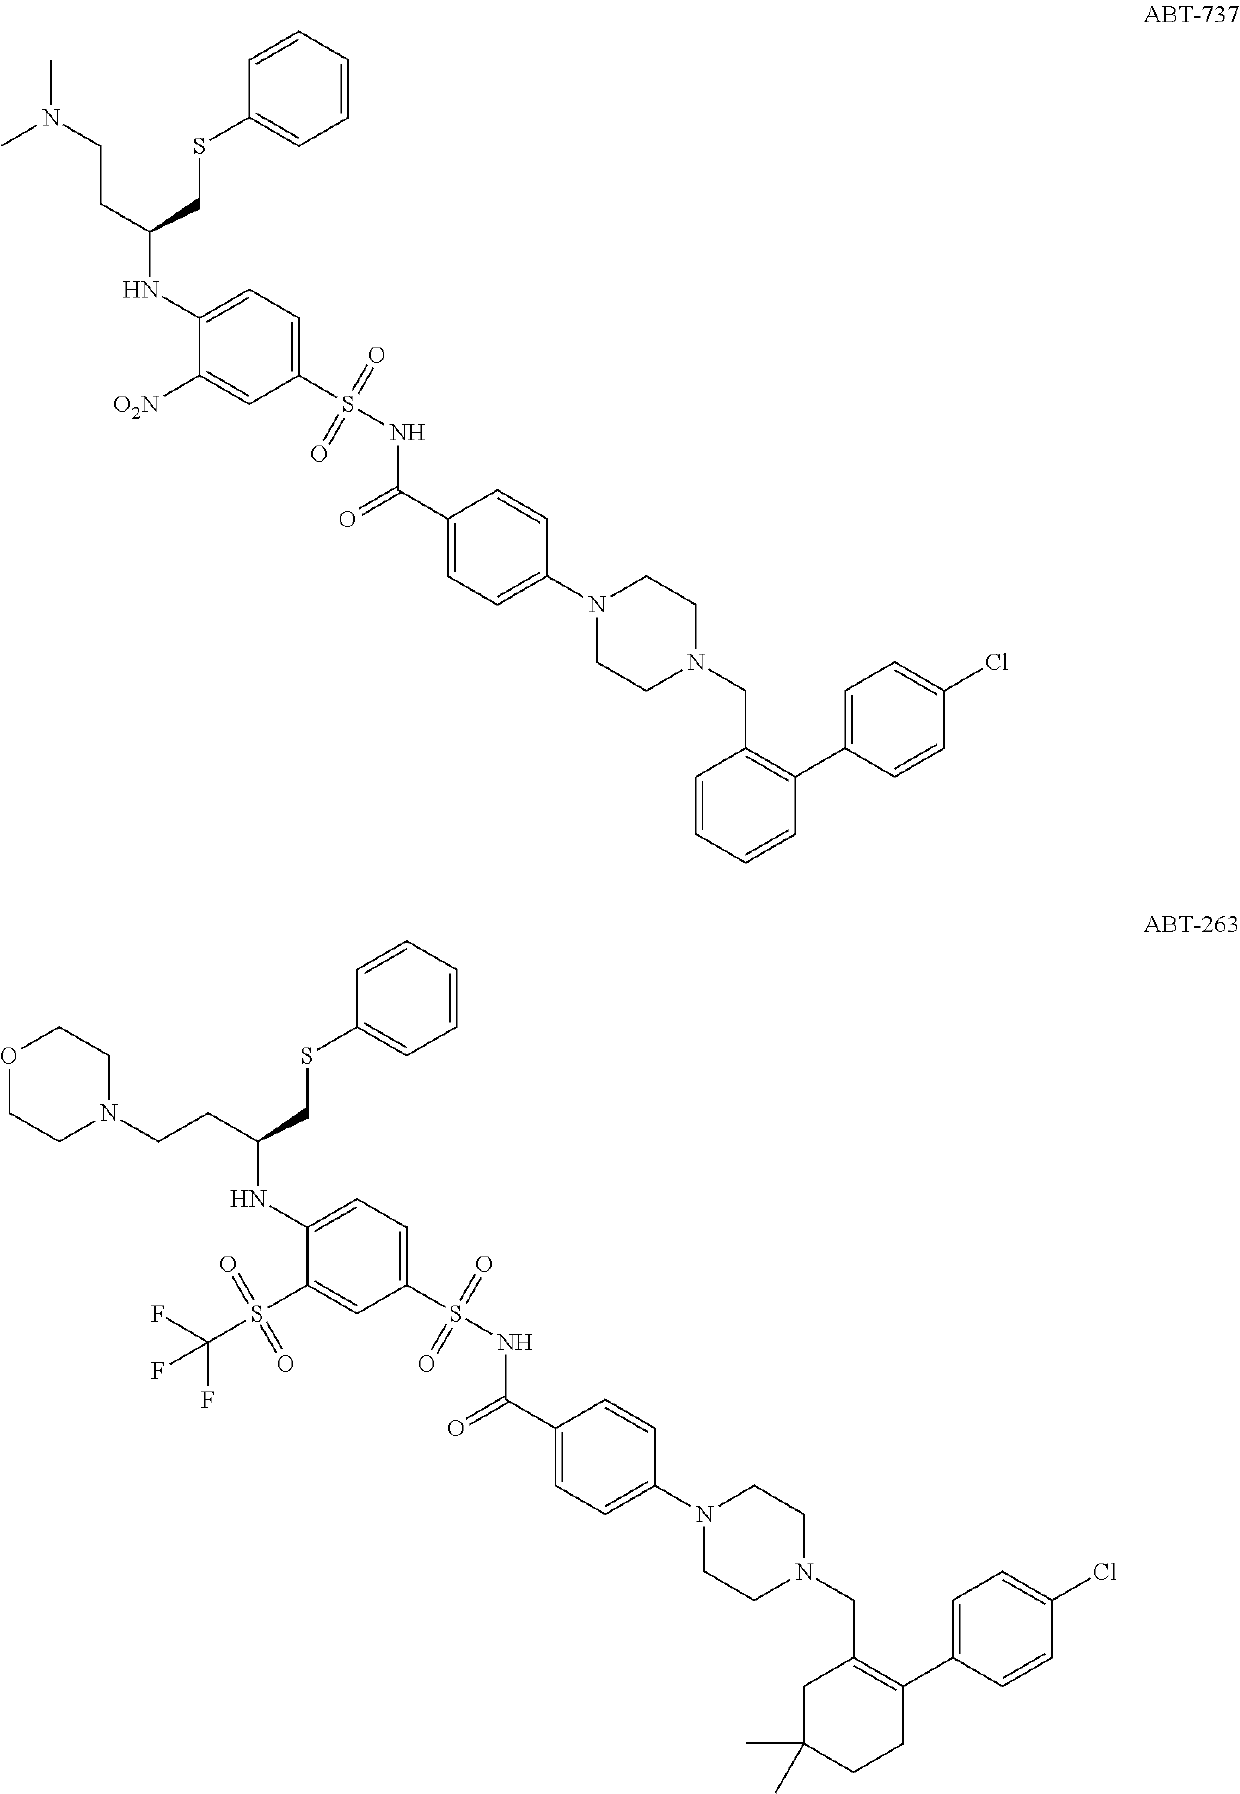 1h-pyrrolo[2,3-b]pyridine derivatives and related compounds as bcl-2 inhibitors for the treatment of neoplastic and autoimmune diseases